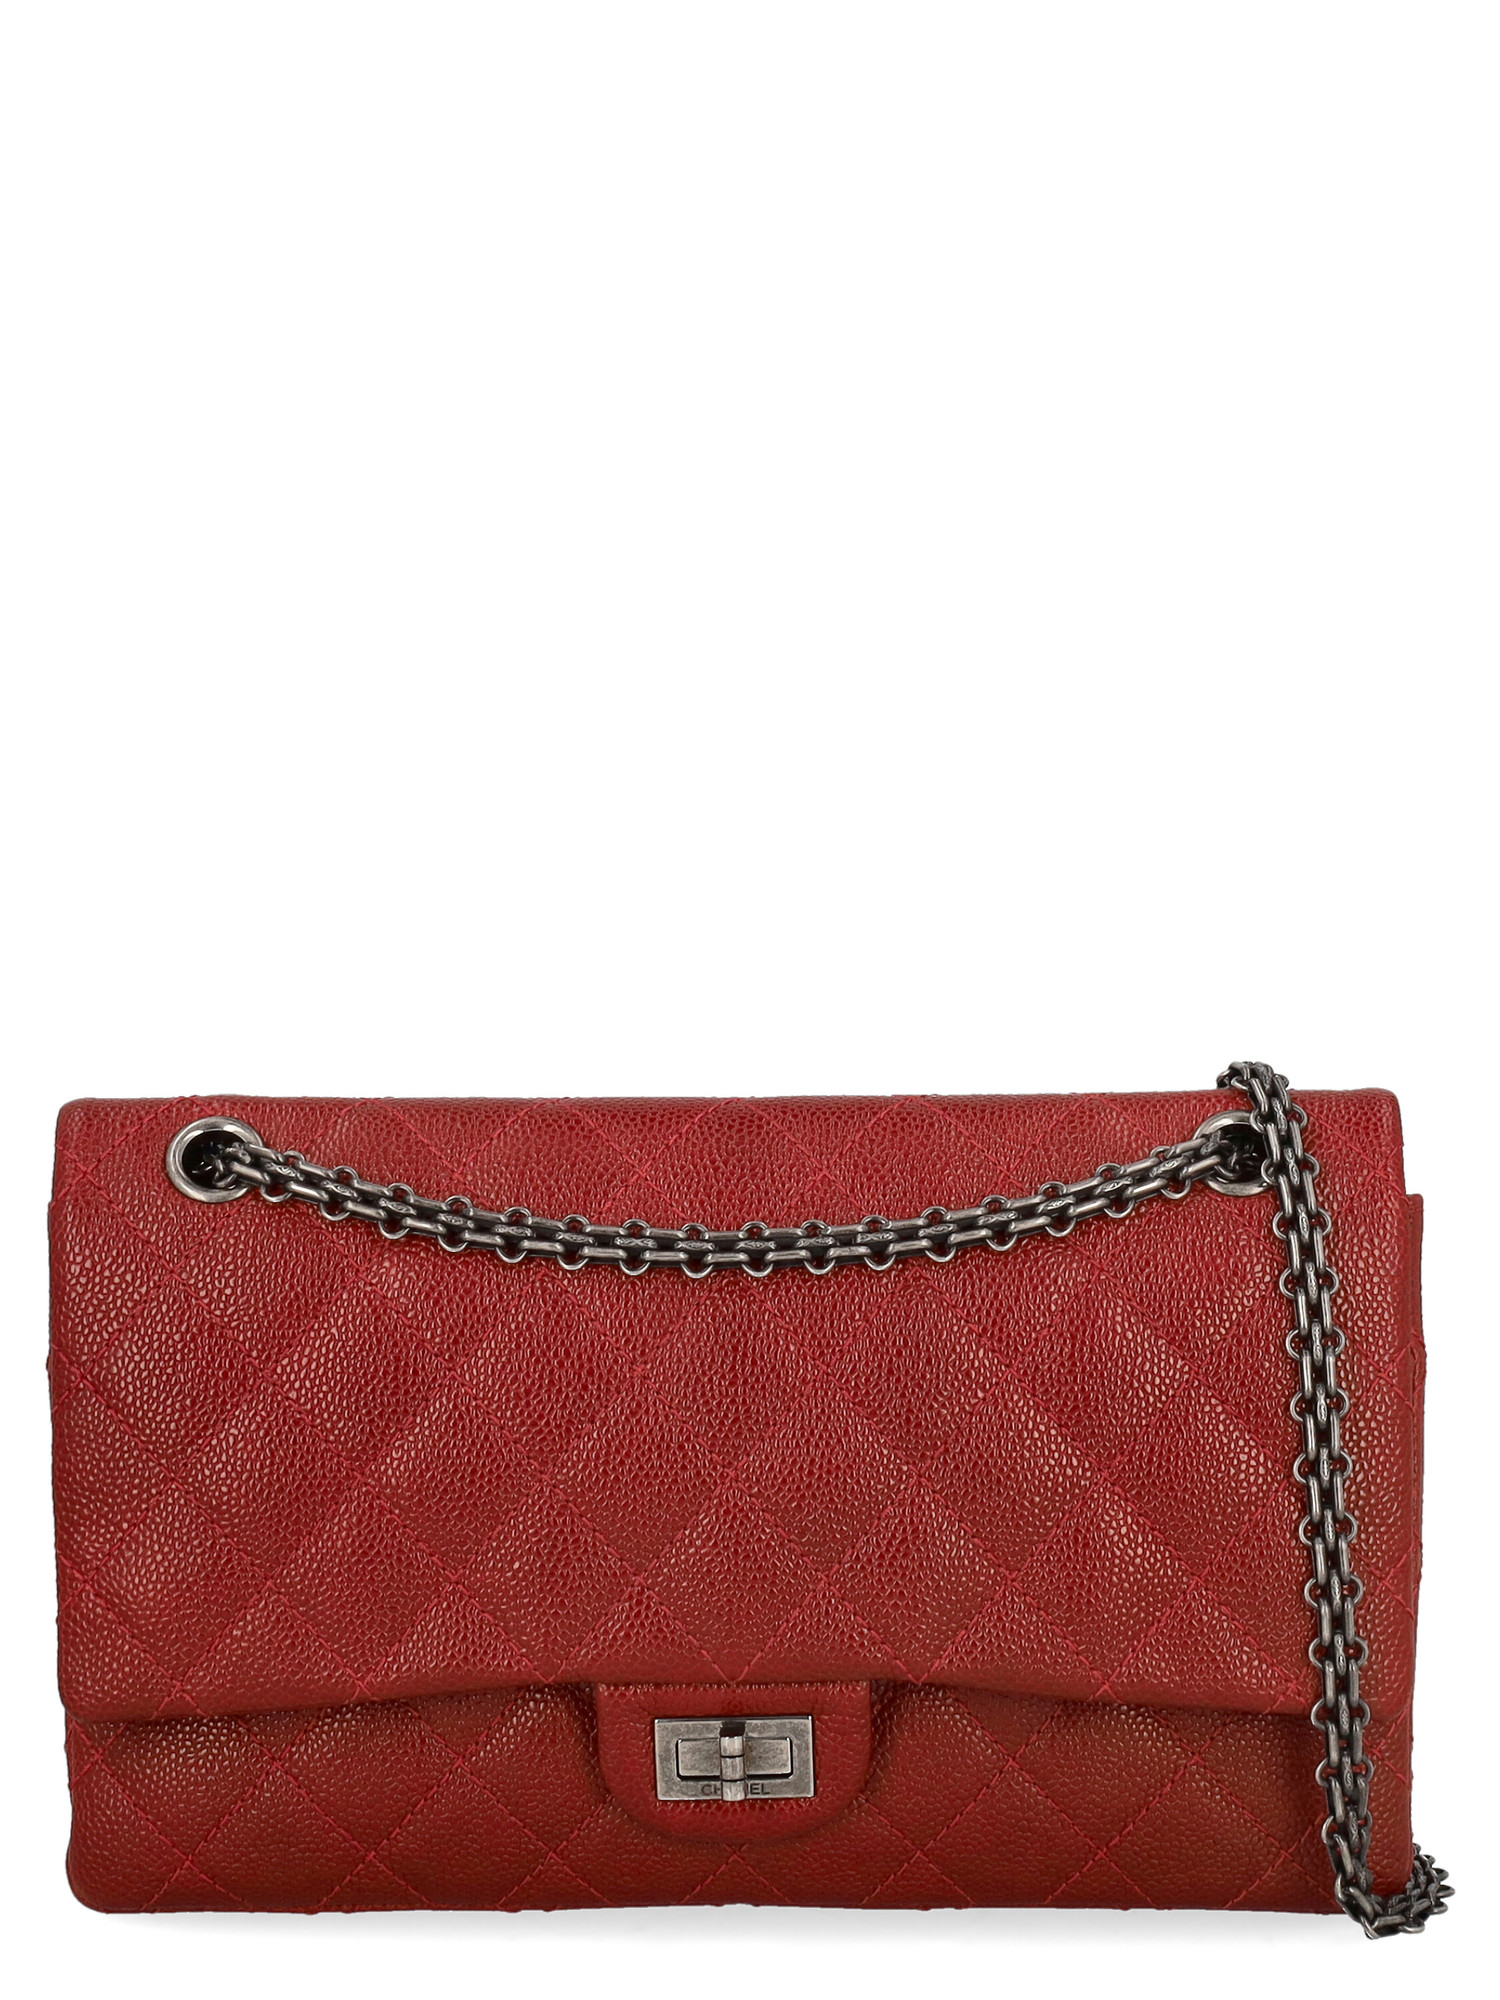 Pre-owned Chanel Women's Shoulder Bags -  - In Red Leather